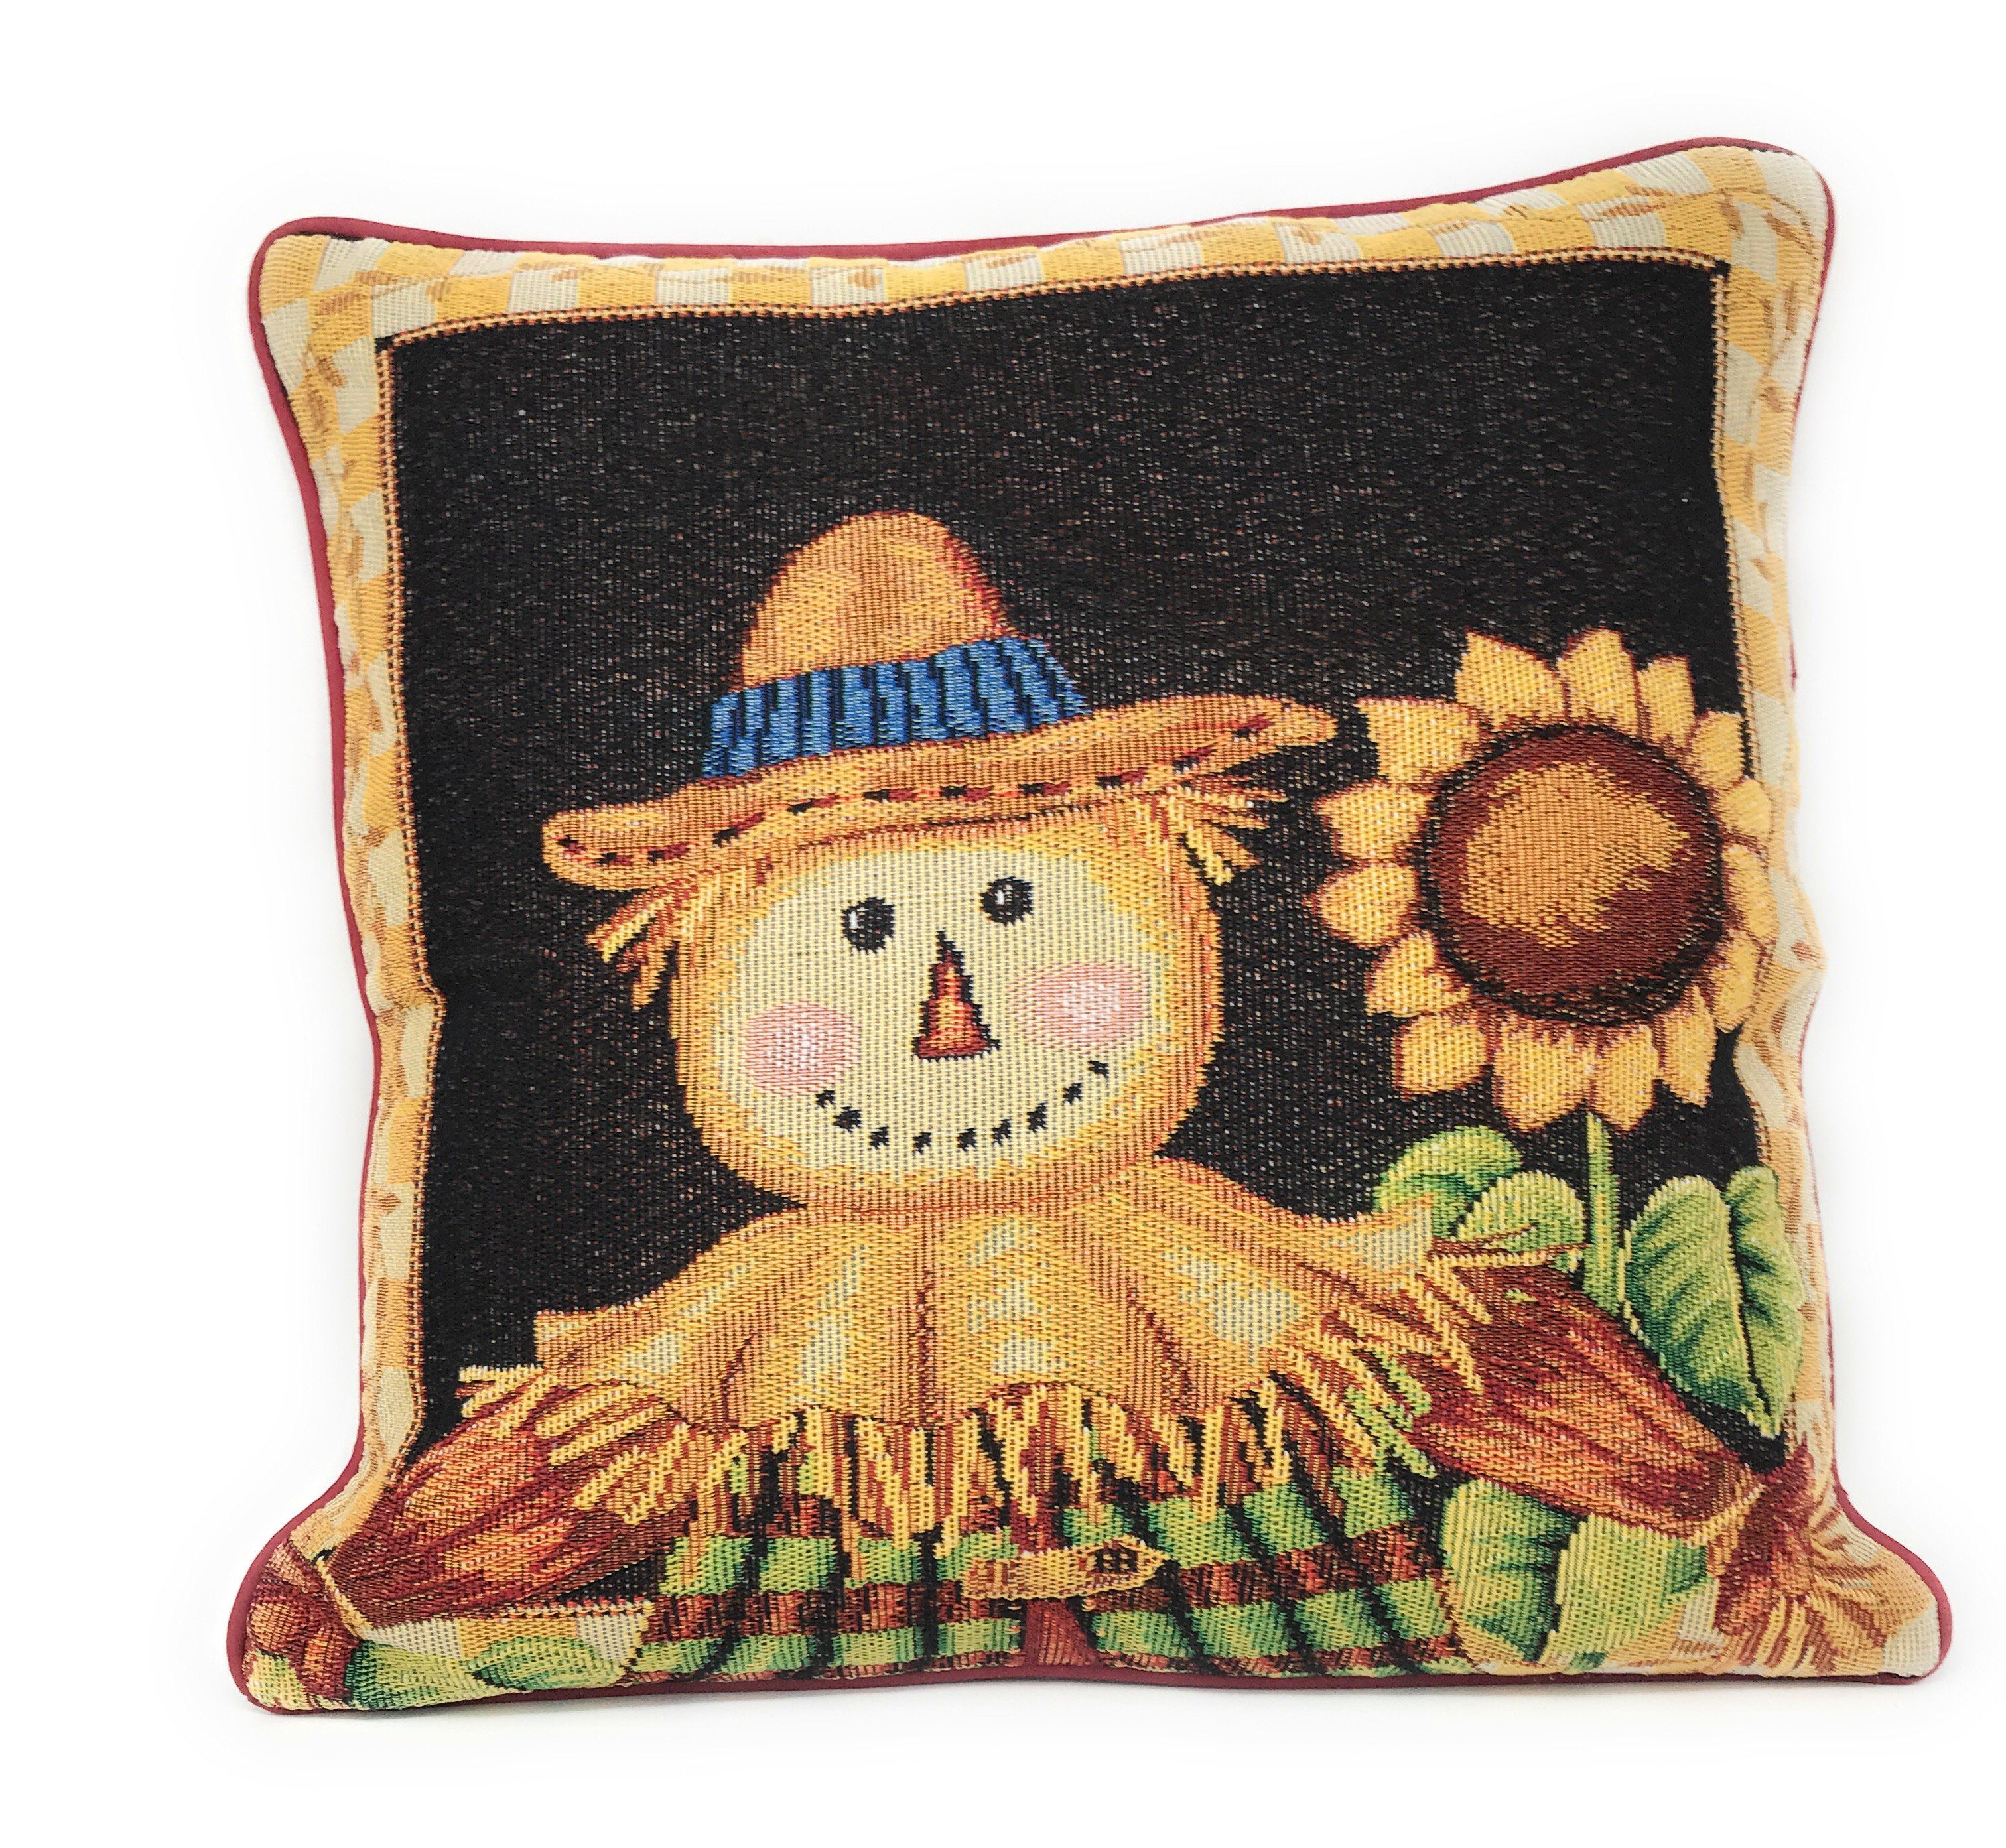 Tache Sunflower Field Scarecrow Autumn Harvest Woven Tapestry Throw Pillow Cover (11712CC) - Tache Home Fashion